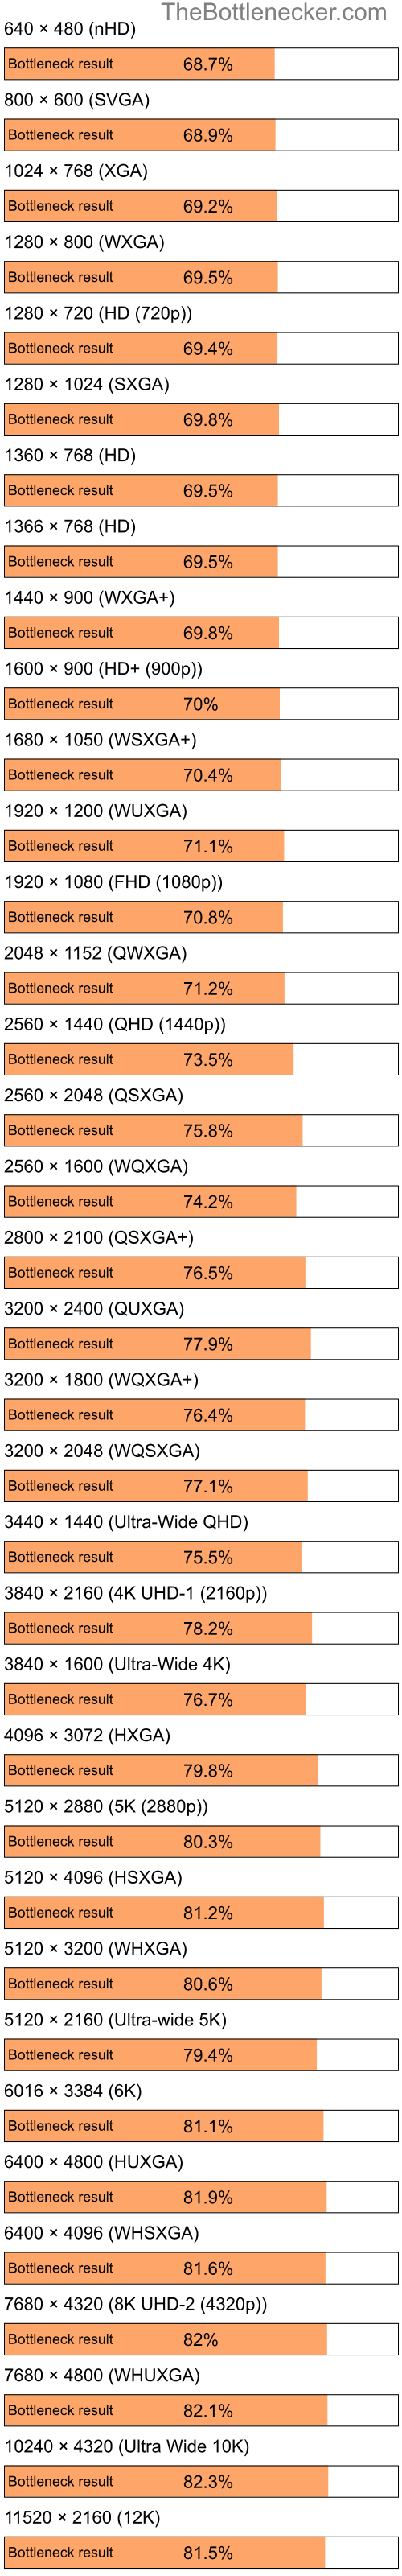 Bottleneck results by resolution for Intel Celeron M and AMD Mobility Radeon X1700 in Graphic Card Intense Tasks